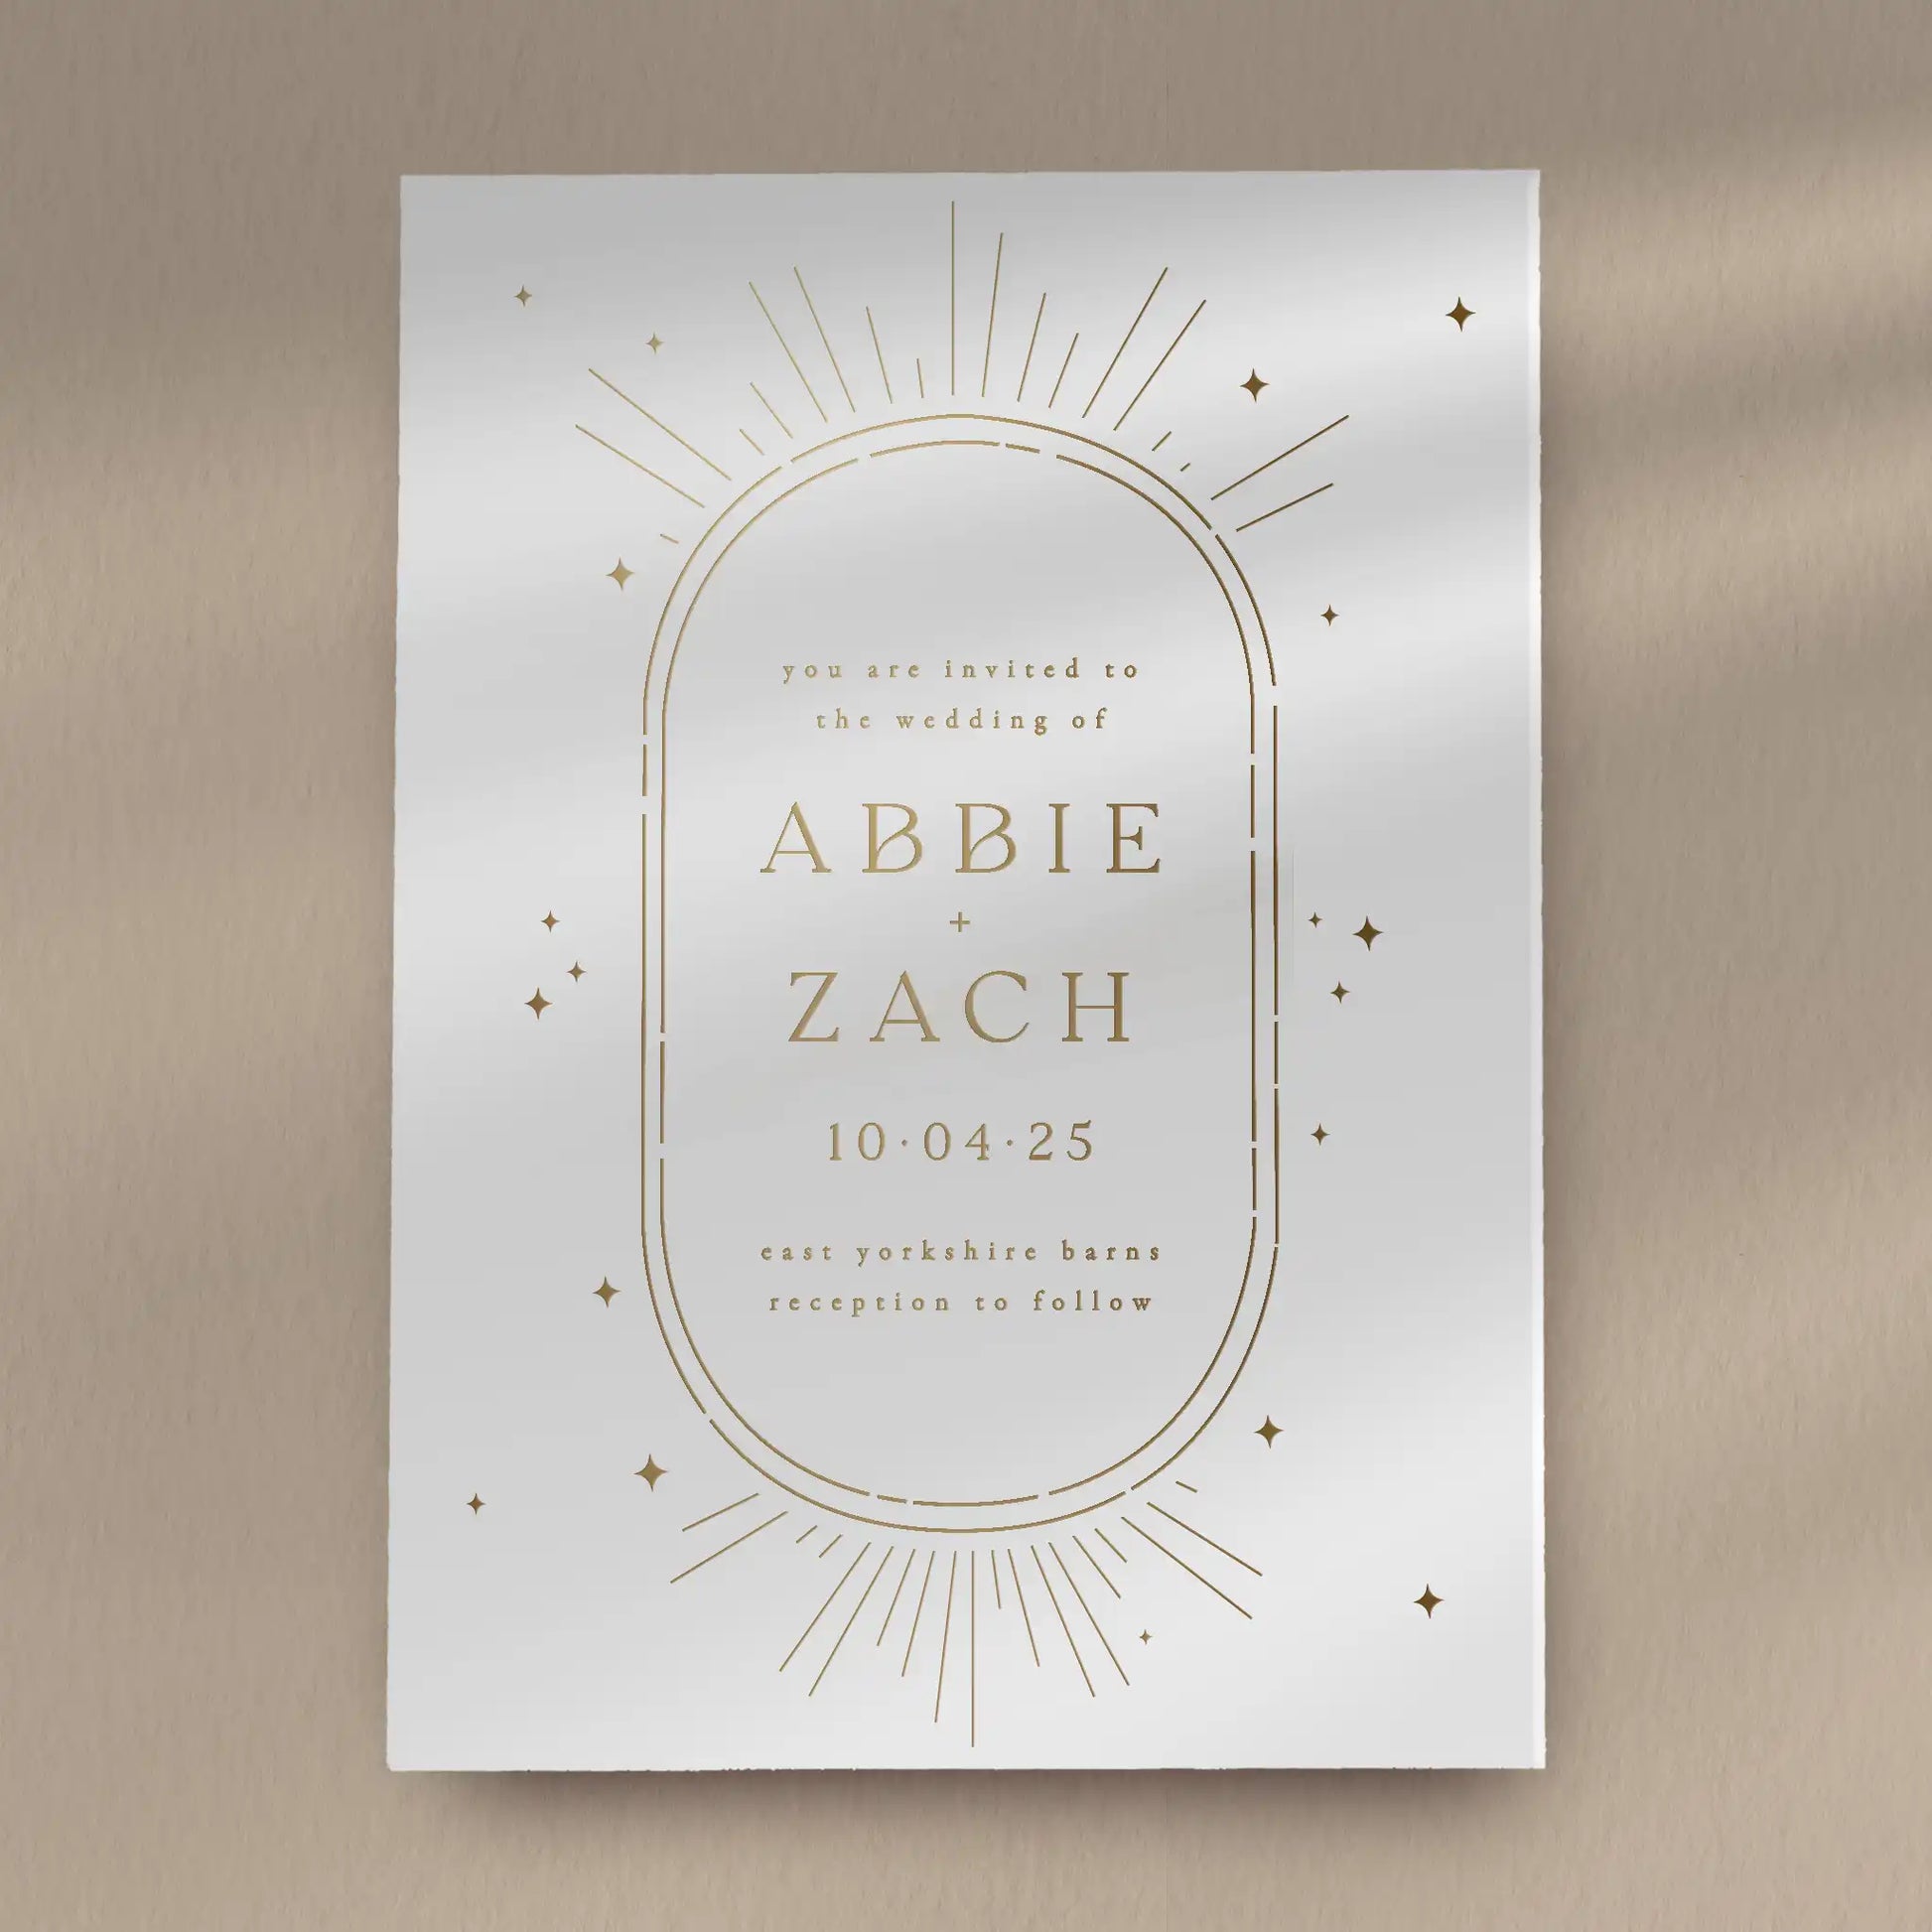 Day Invitation Sample  Ivy and Gold Wedding Stationery Abbie  